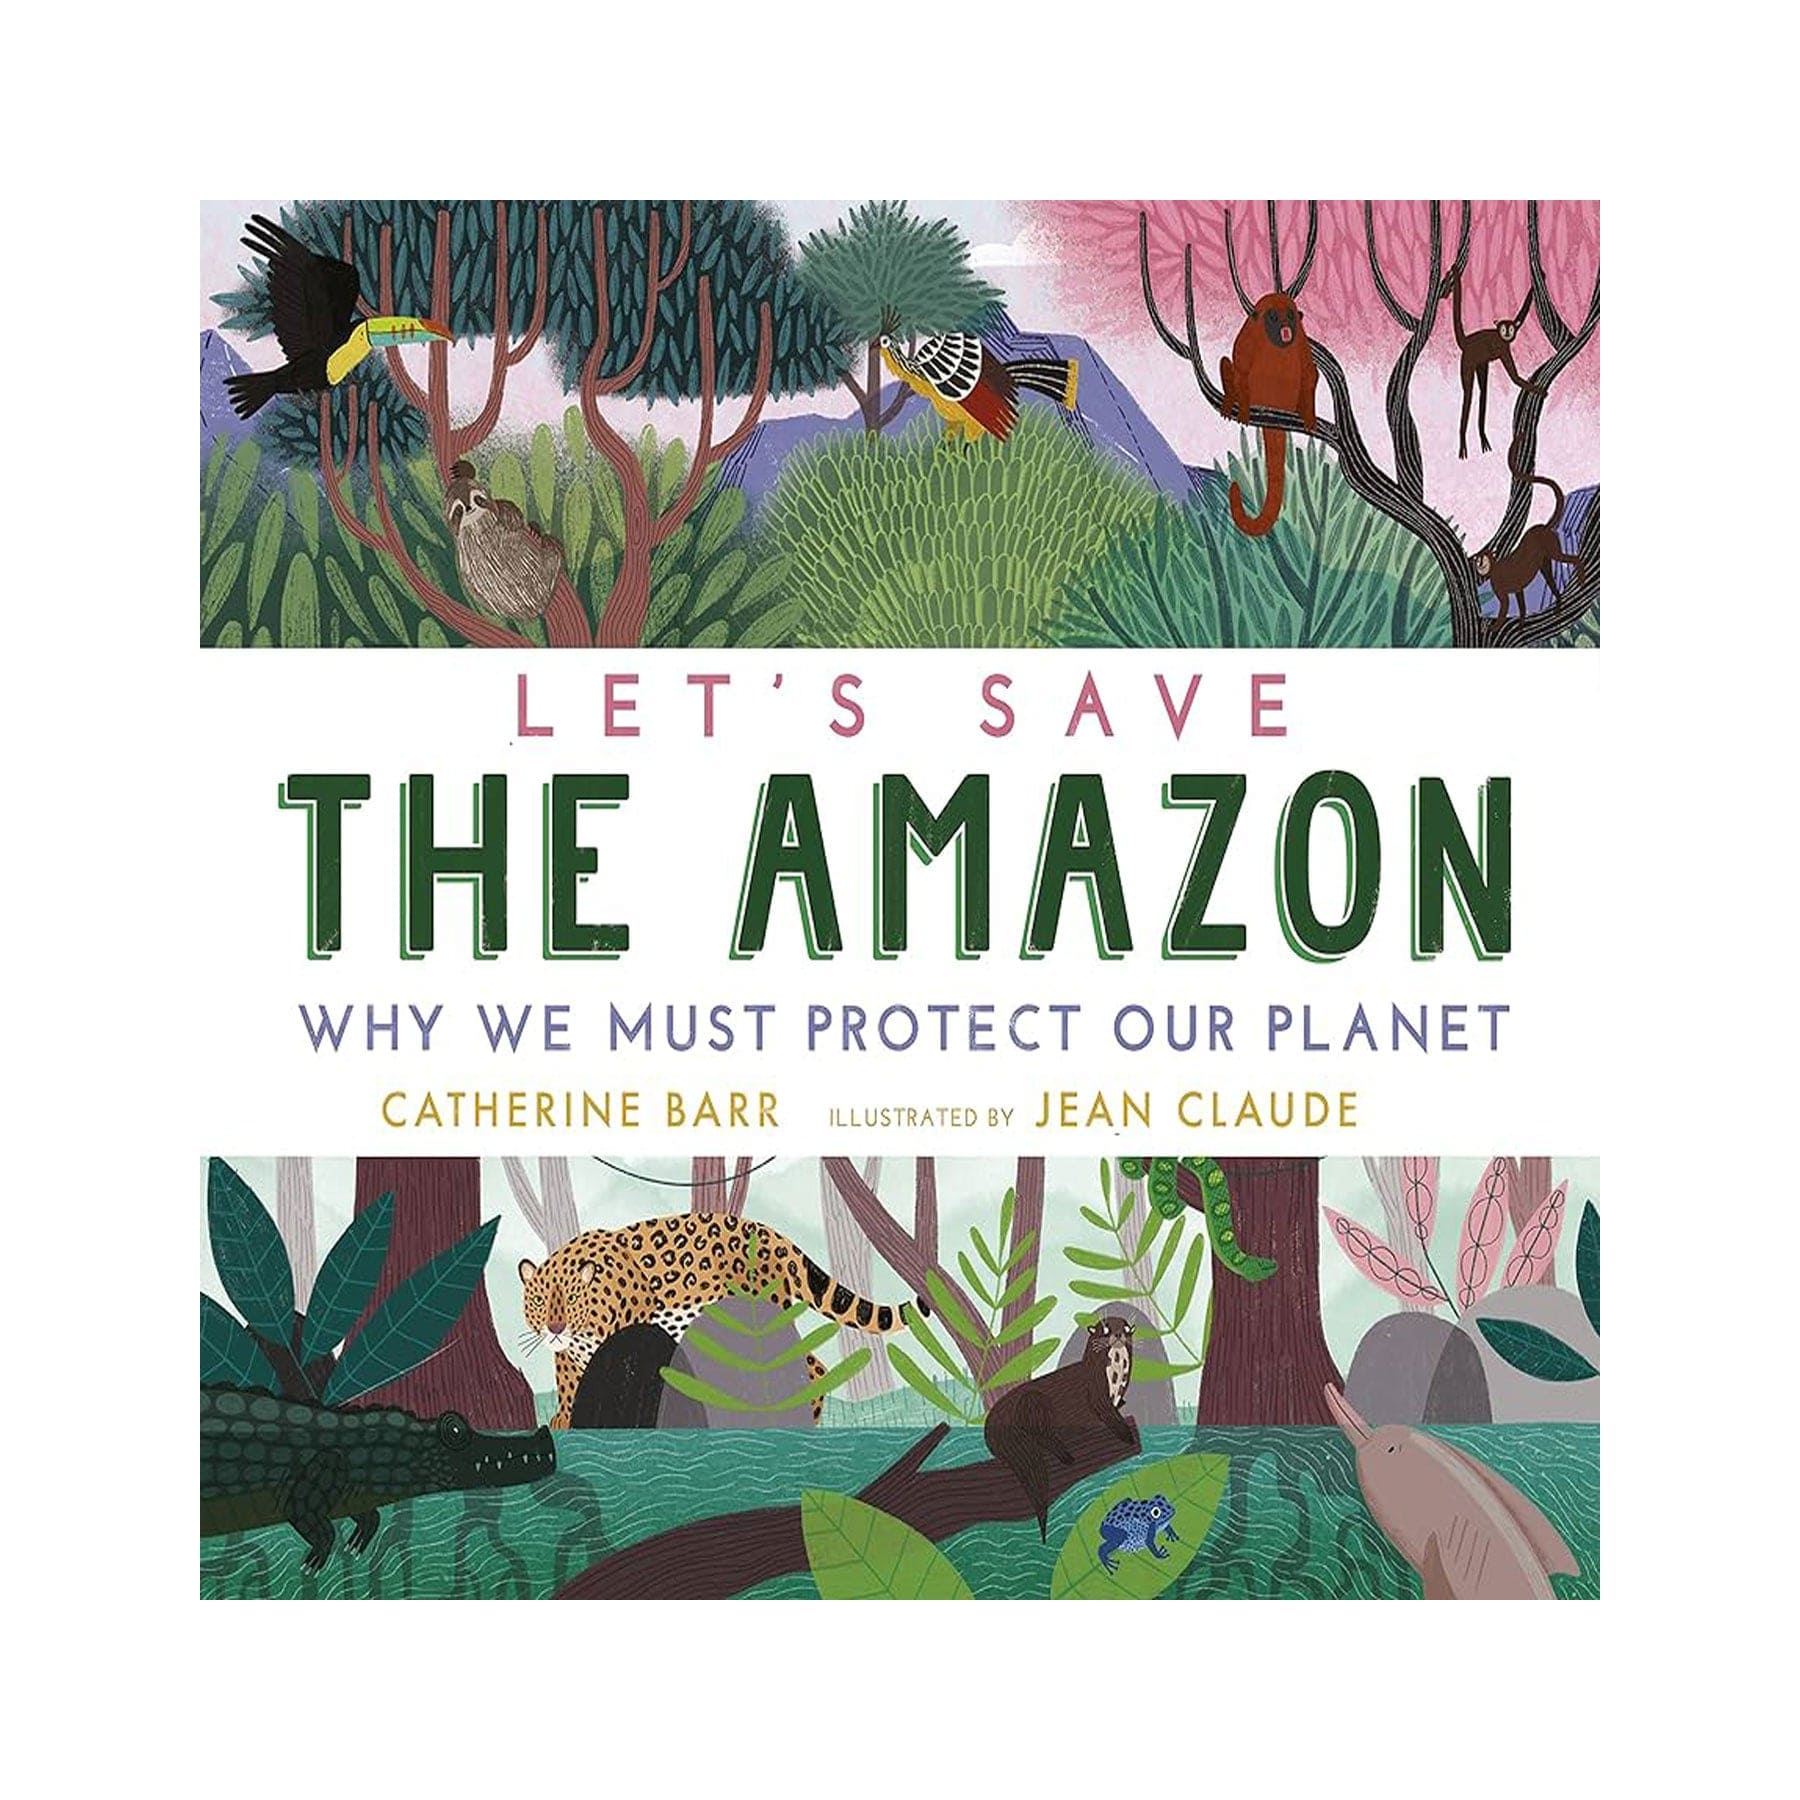 Lets save the amazon